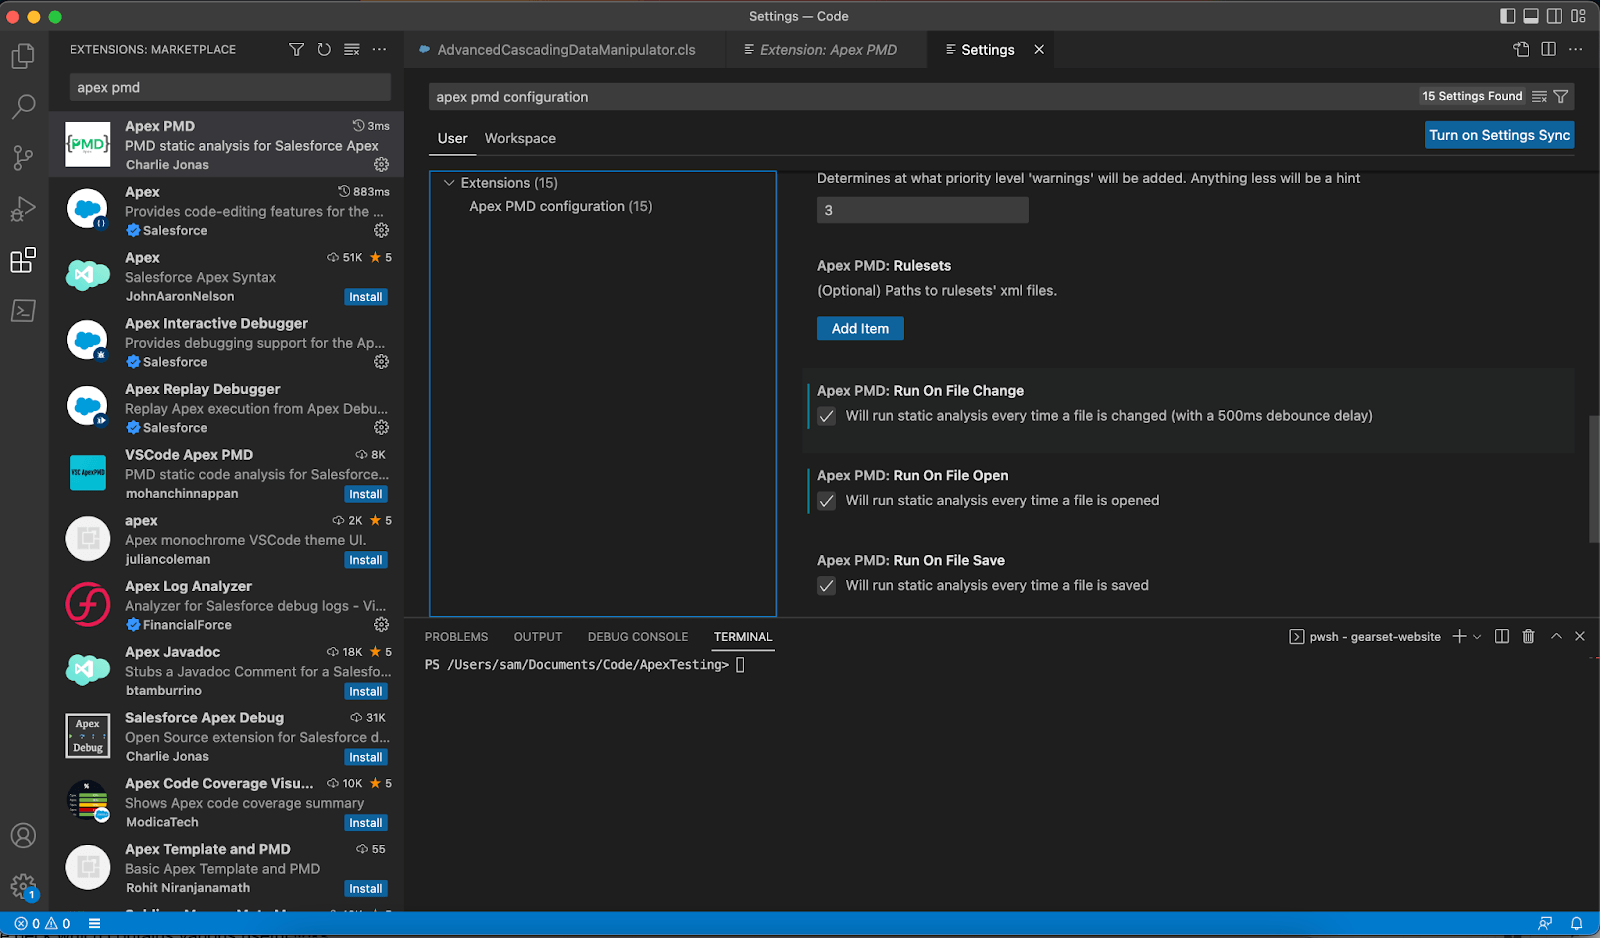 Verify Apex PMD is installed as a VSCode extension